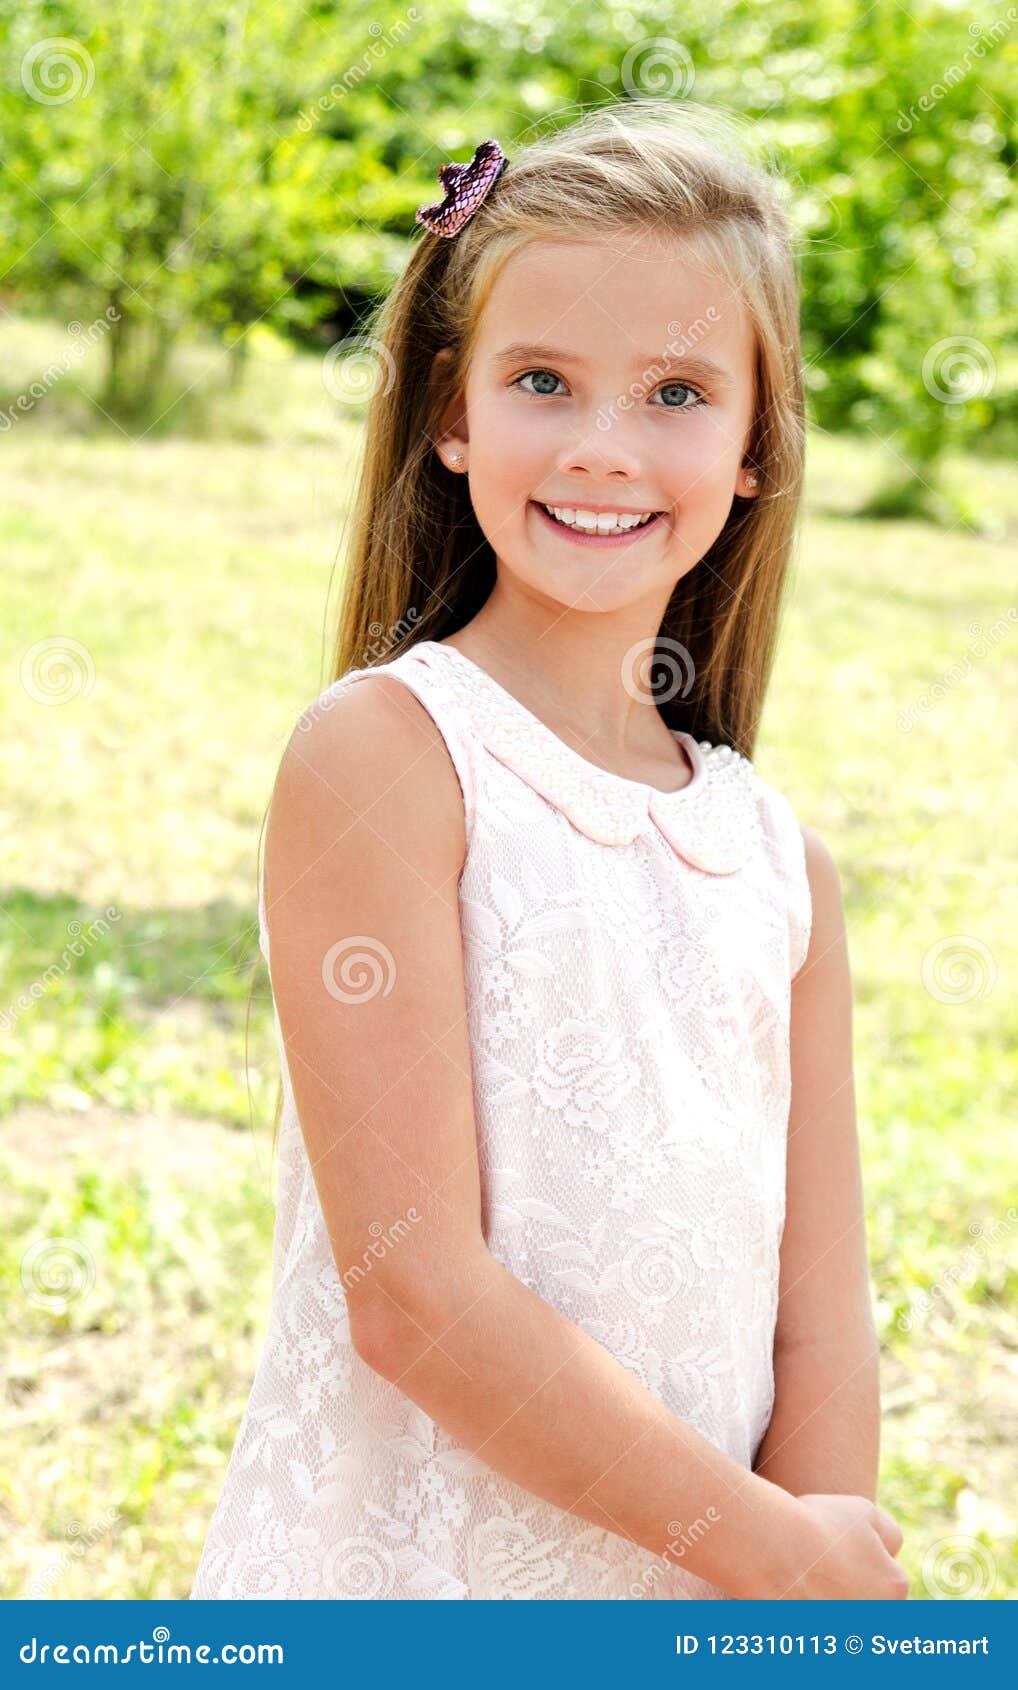 Portrait of Adorable Smiling Little Girl Outdoors Stock Image - Image ...